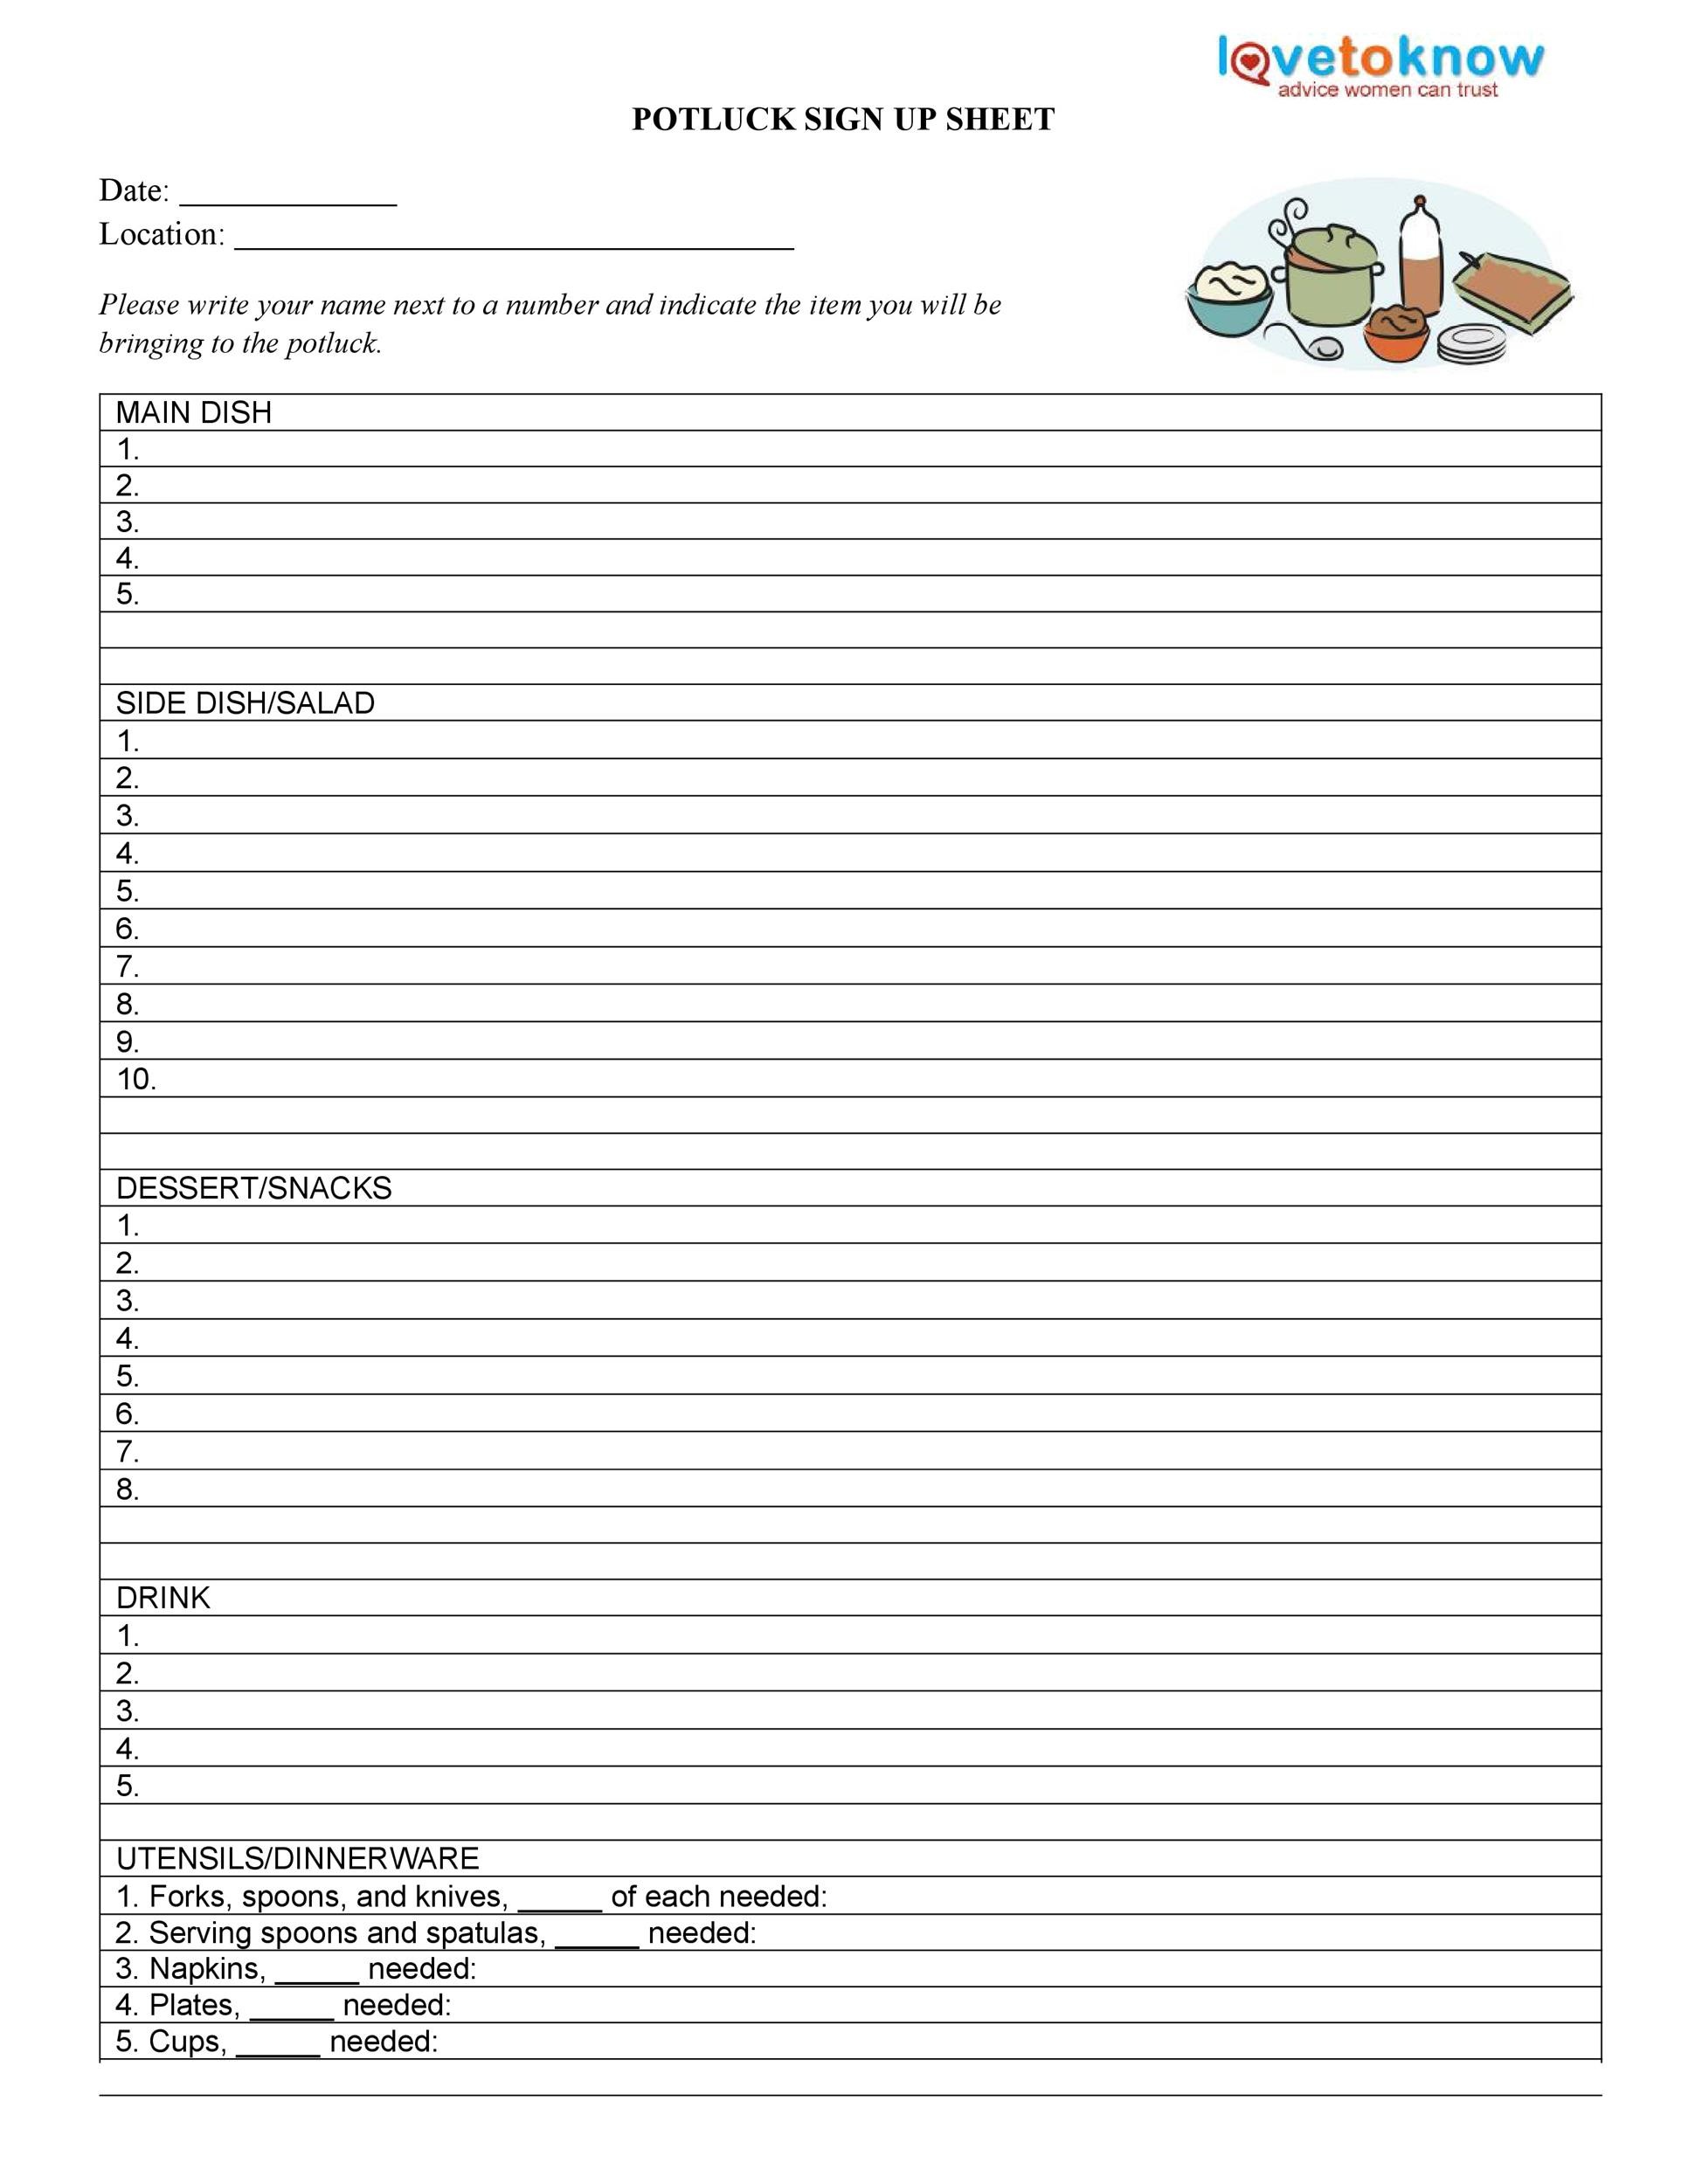 37 Best Potluck Signup Sheets (For Any Occasion) ᐅ TemplateLab